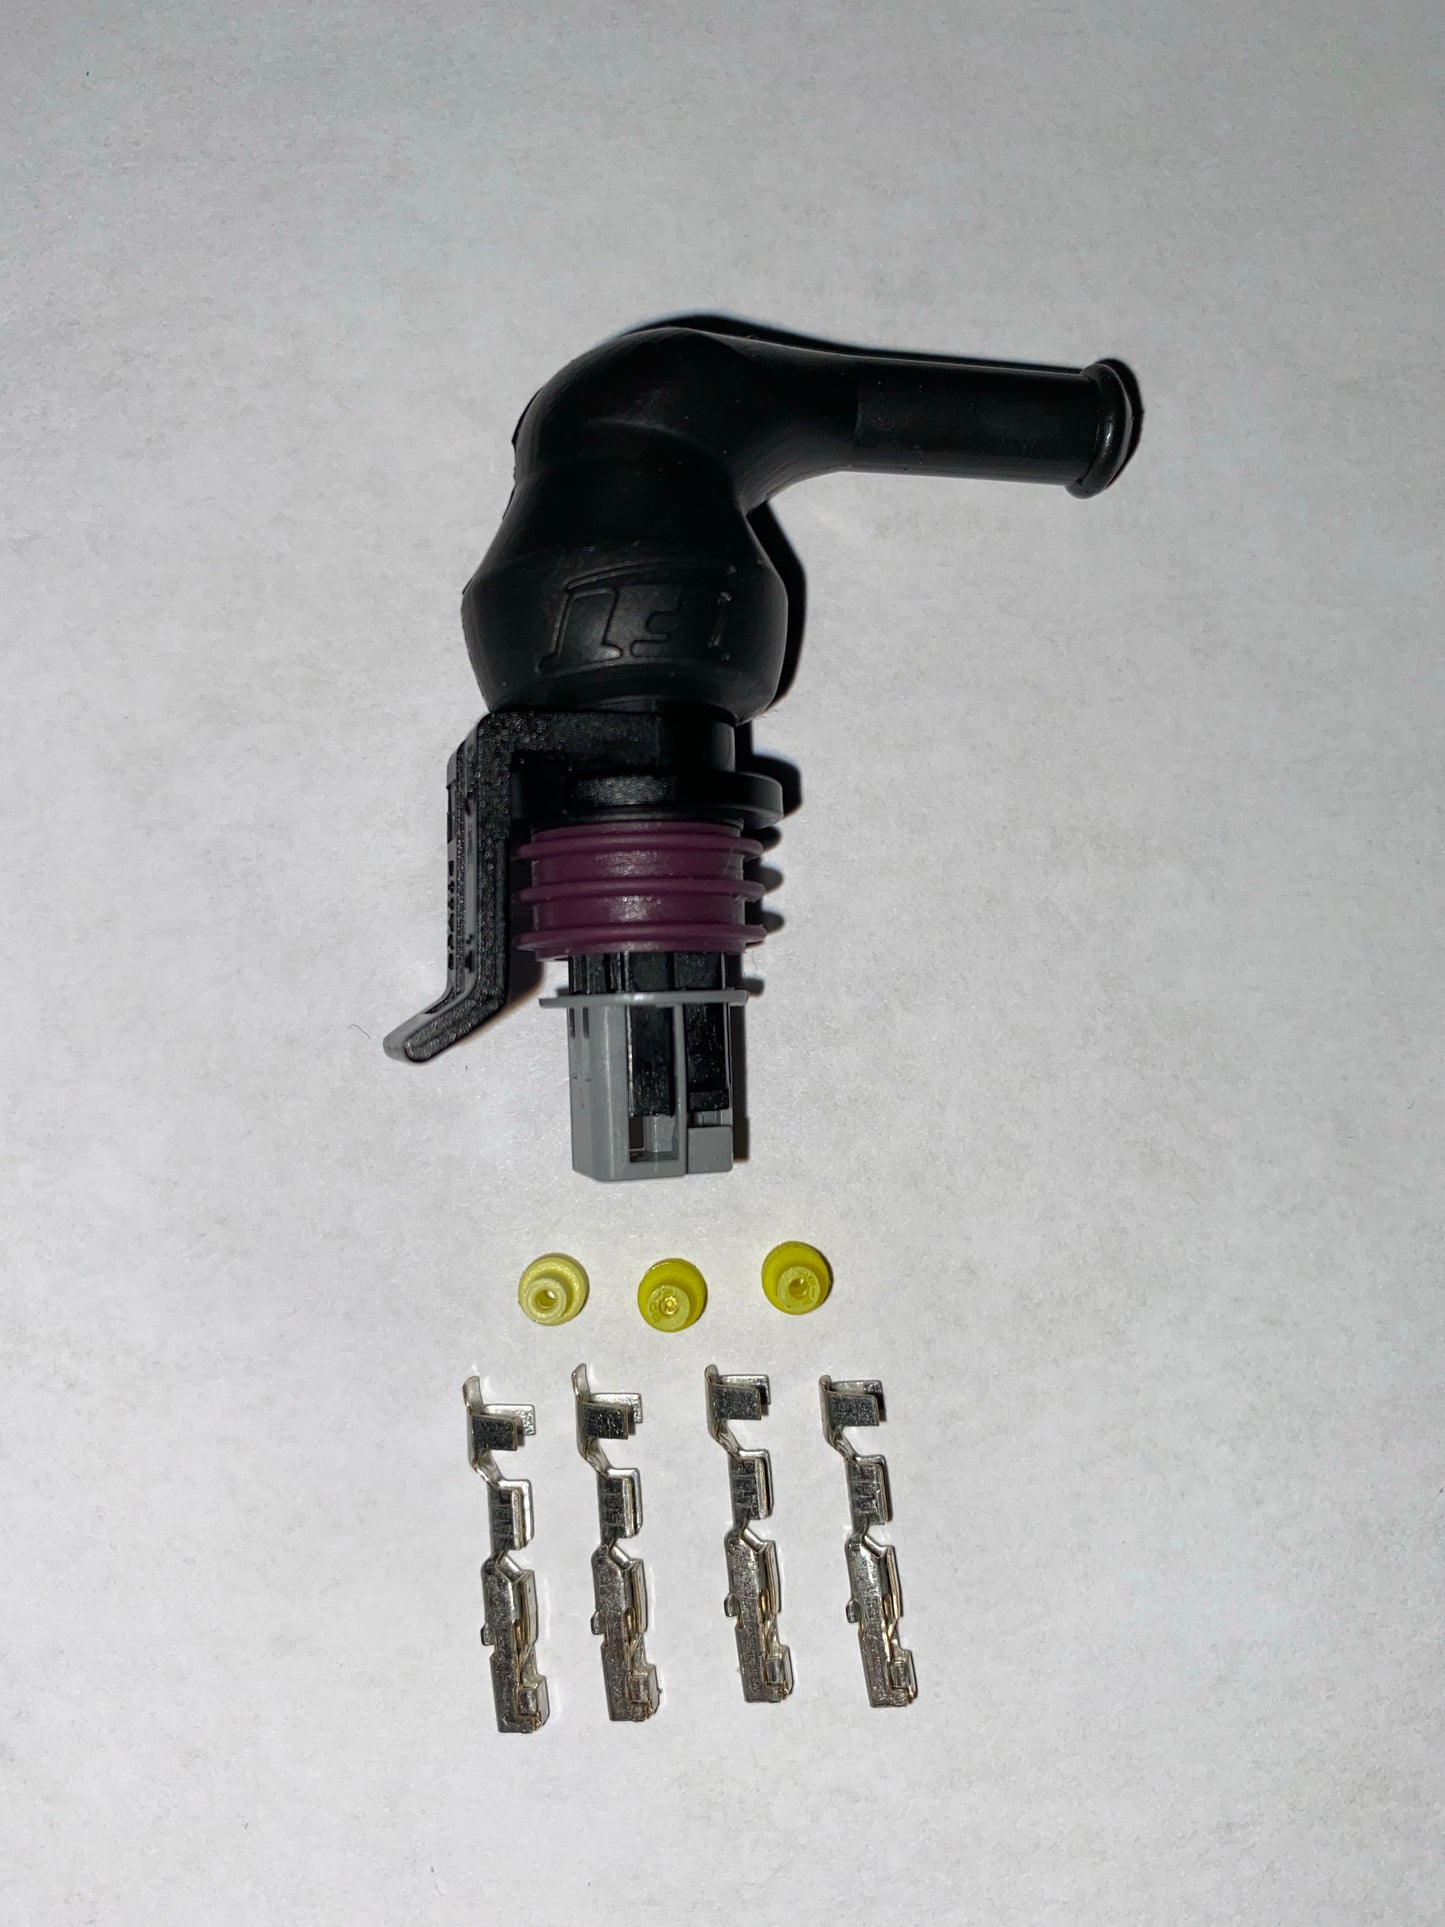 Pressure Sensor Connector Kit With 90 Degree Fueltech Boot